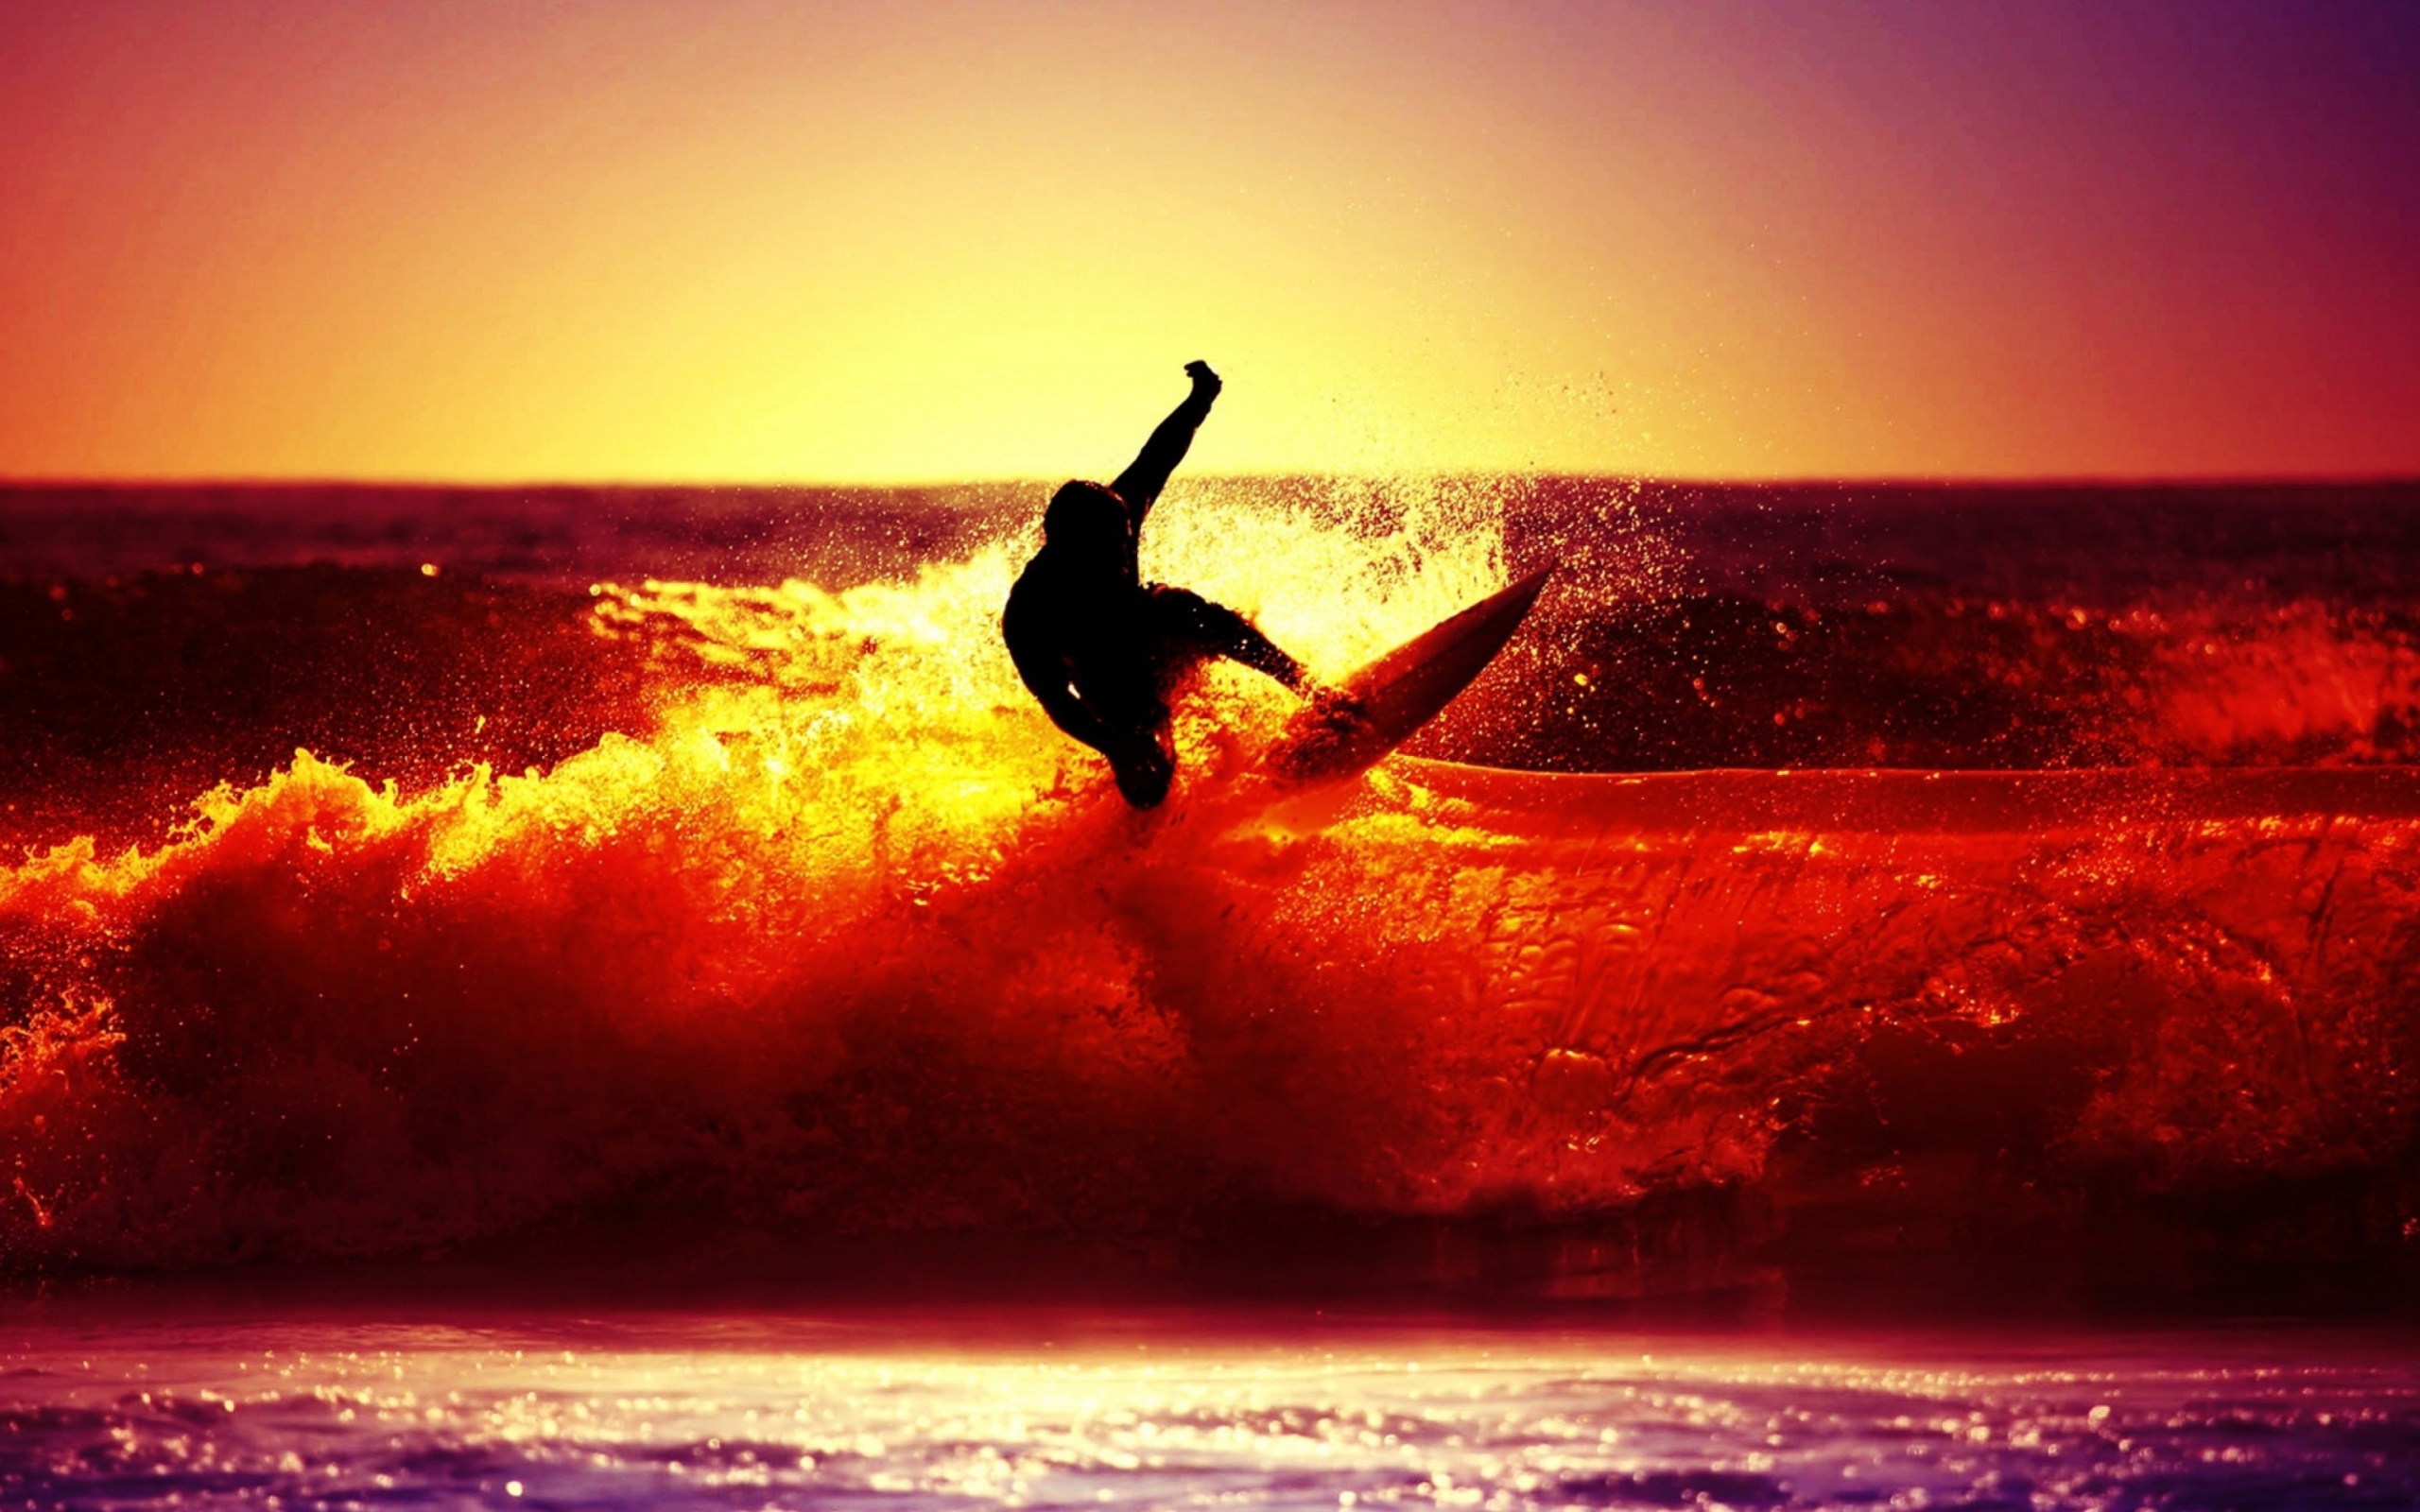 Surfing At Sunset wallpaper 2560x1600